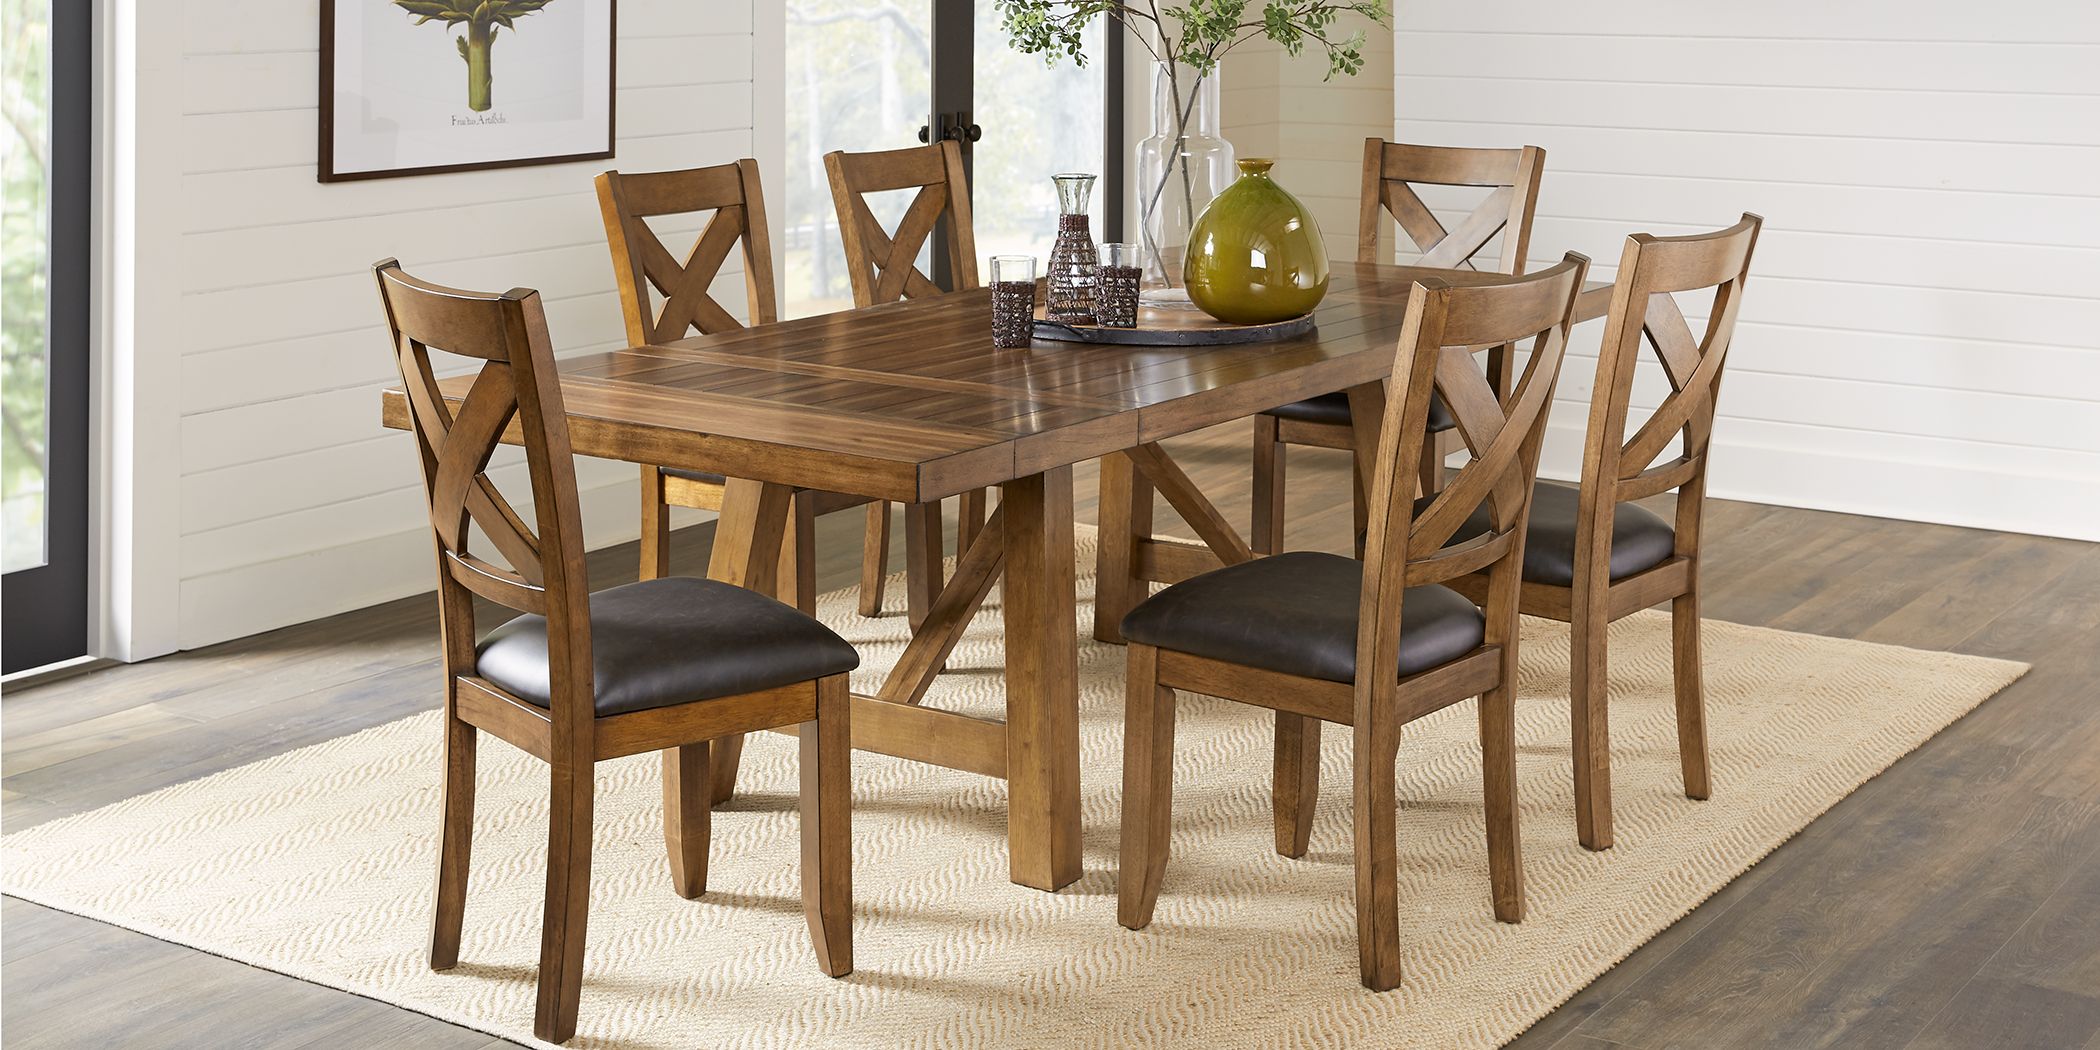 Rooms To Go Dining Room Furniture, Rooms To Go Furniture Dining Room Chairs